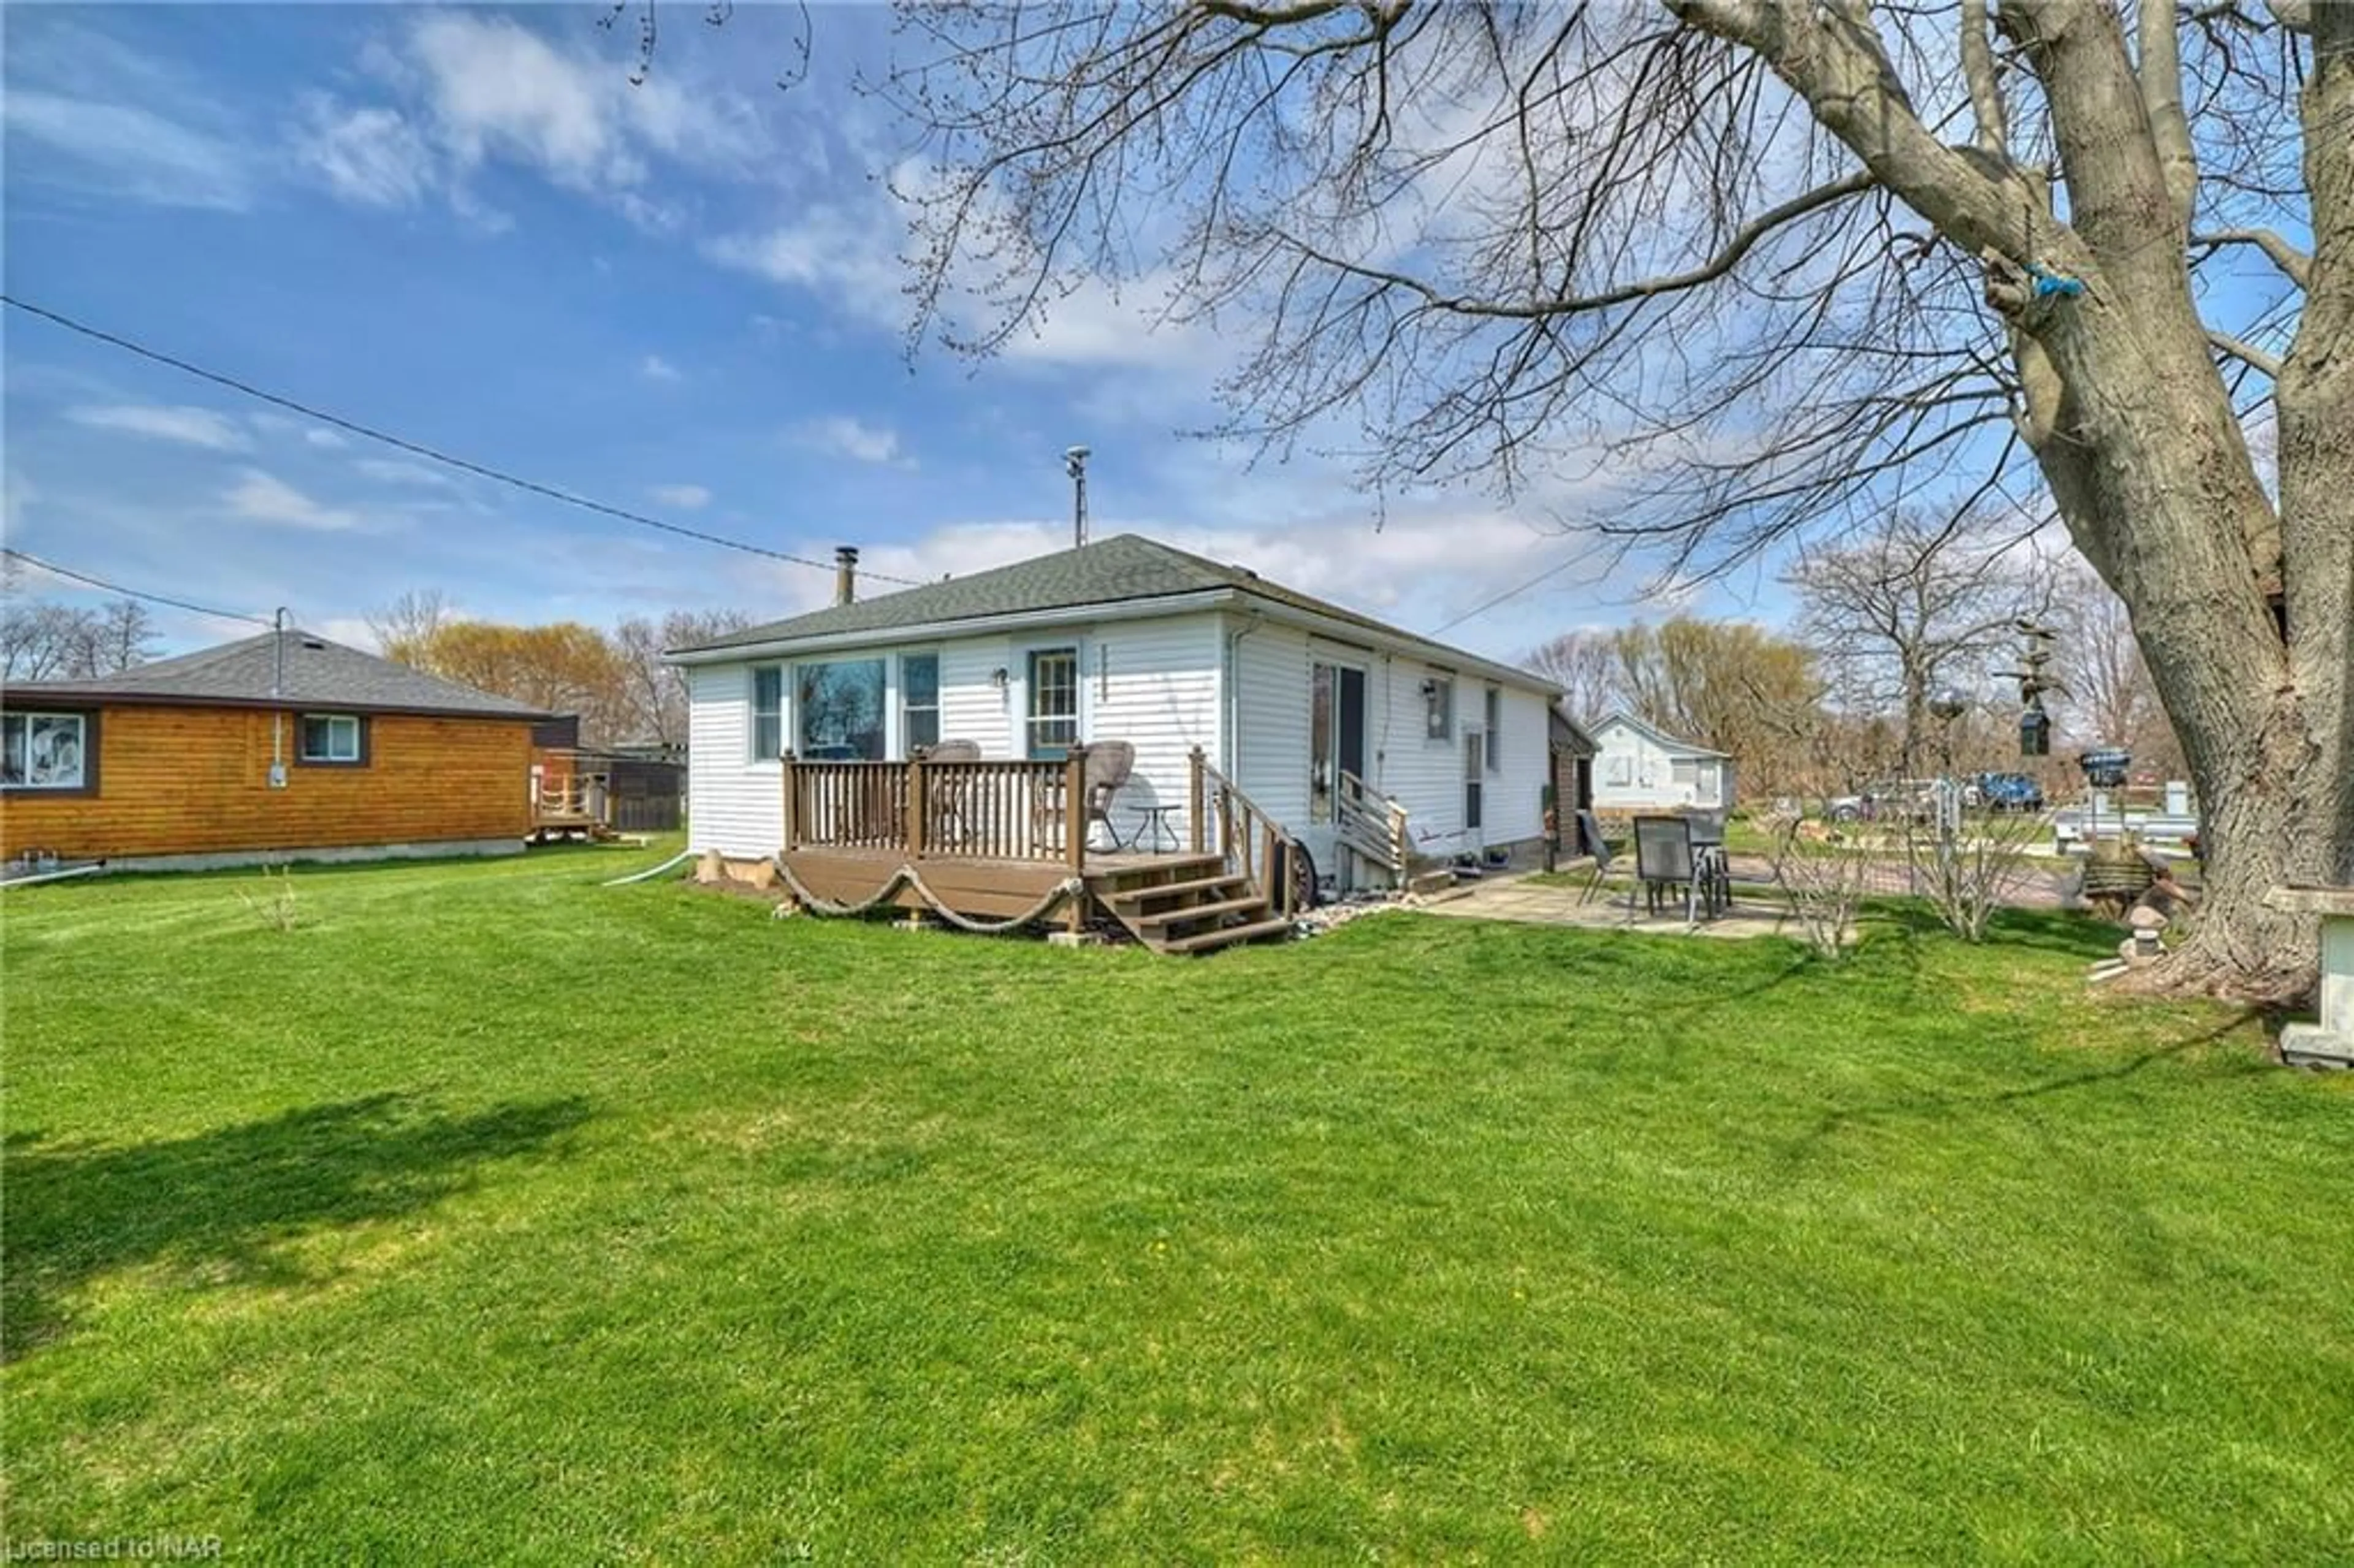 Cottage for 11780 Lakeshore Rd, Wainfleet Ontario L0S 1V0